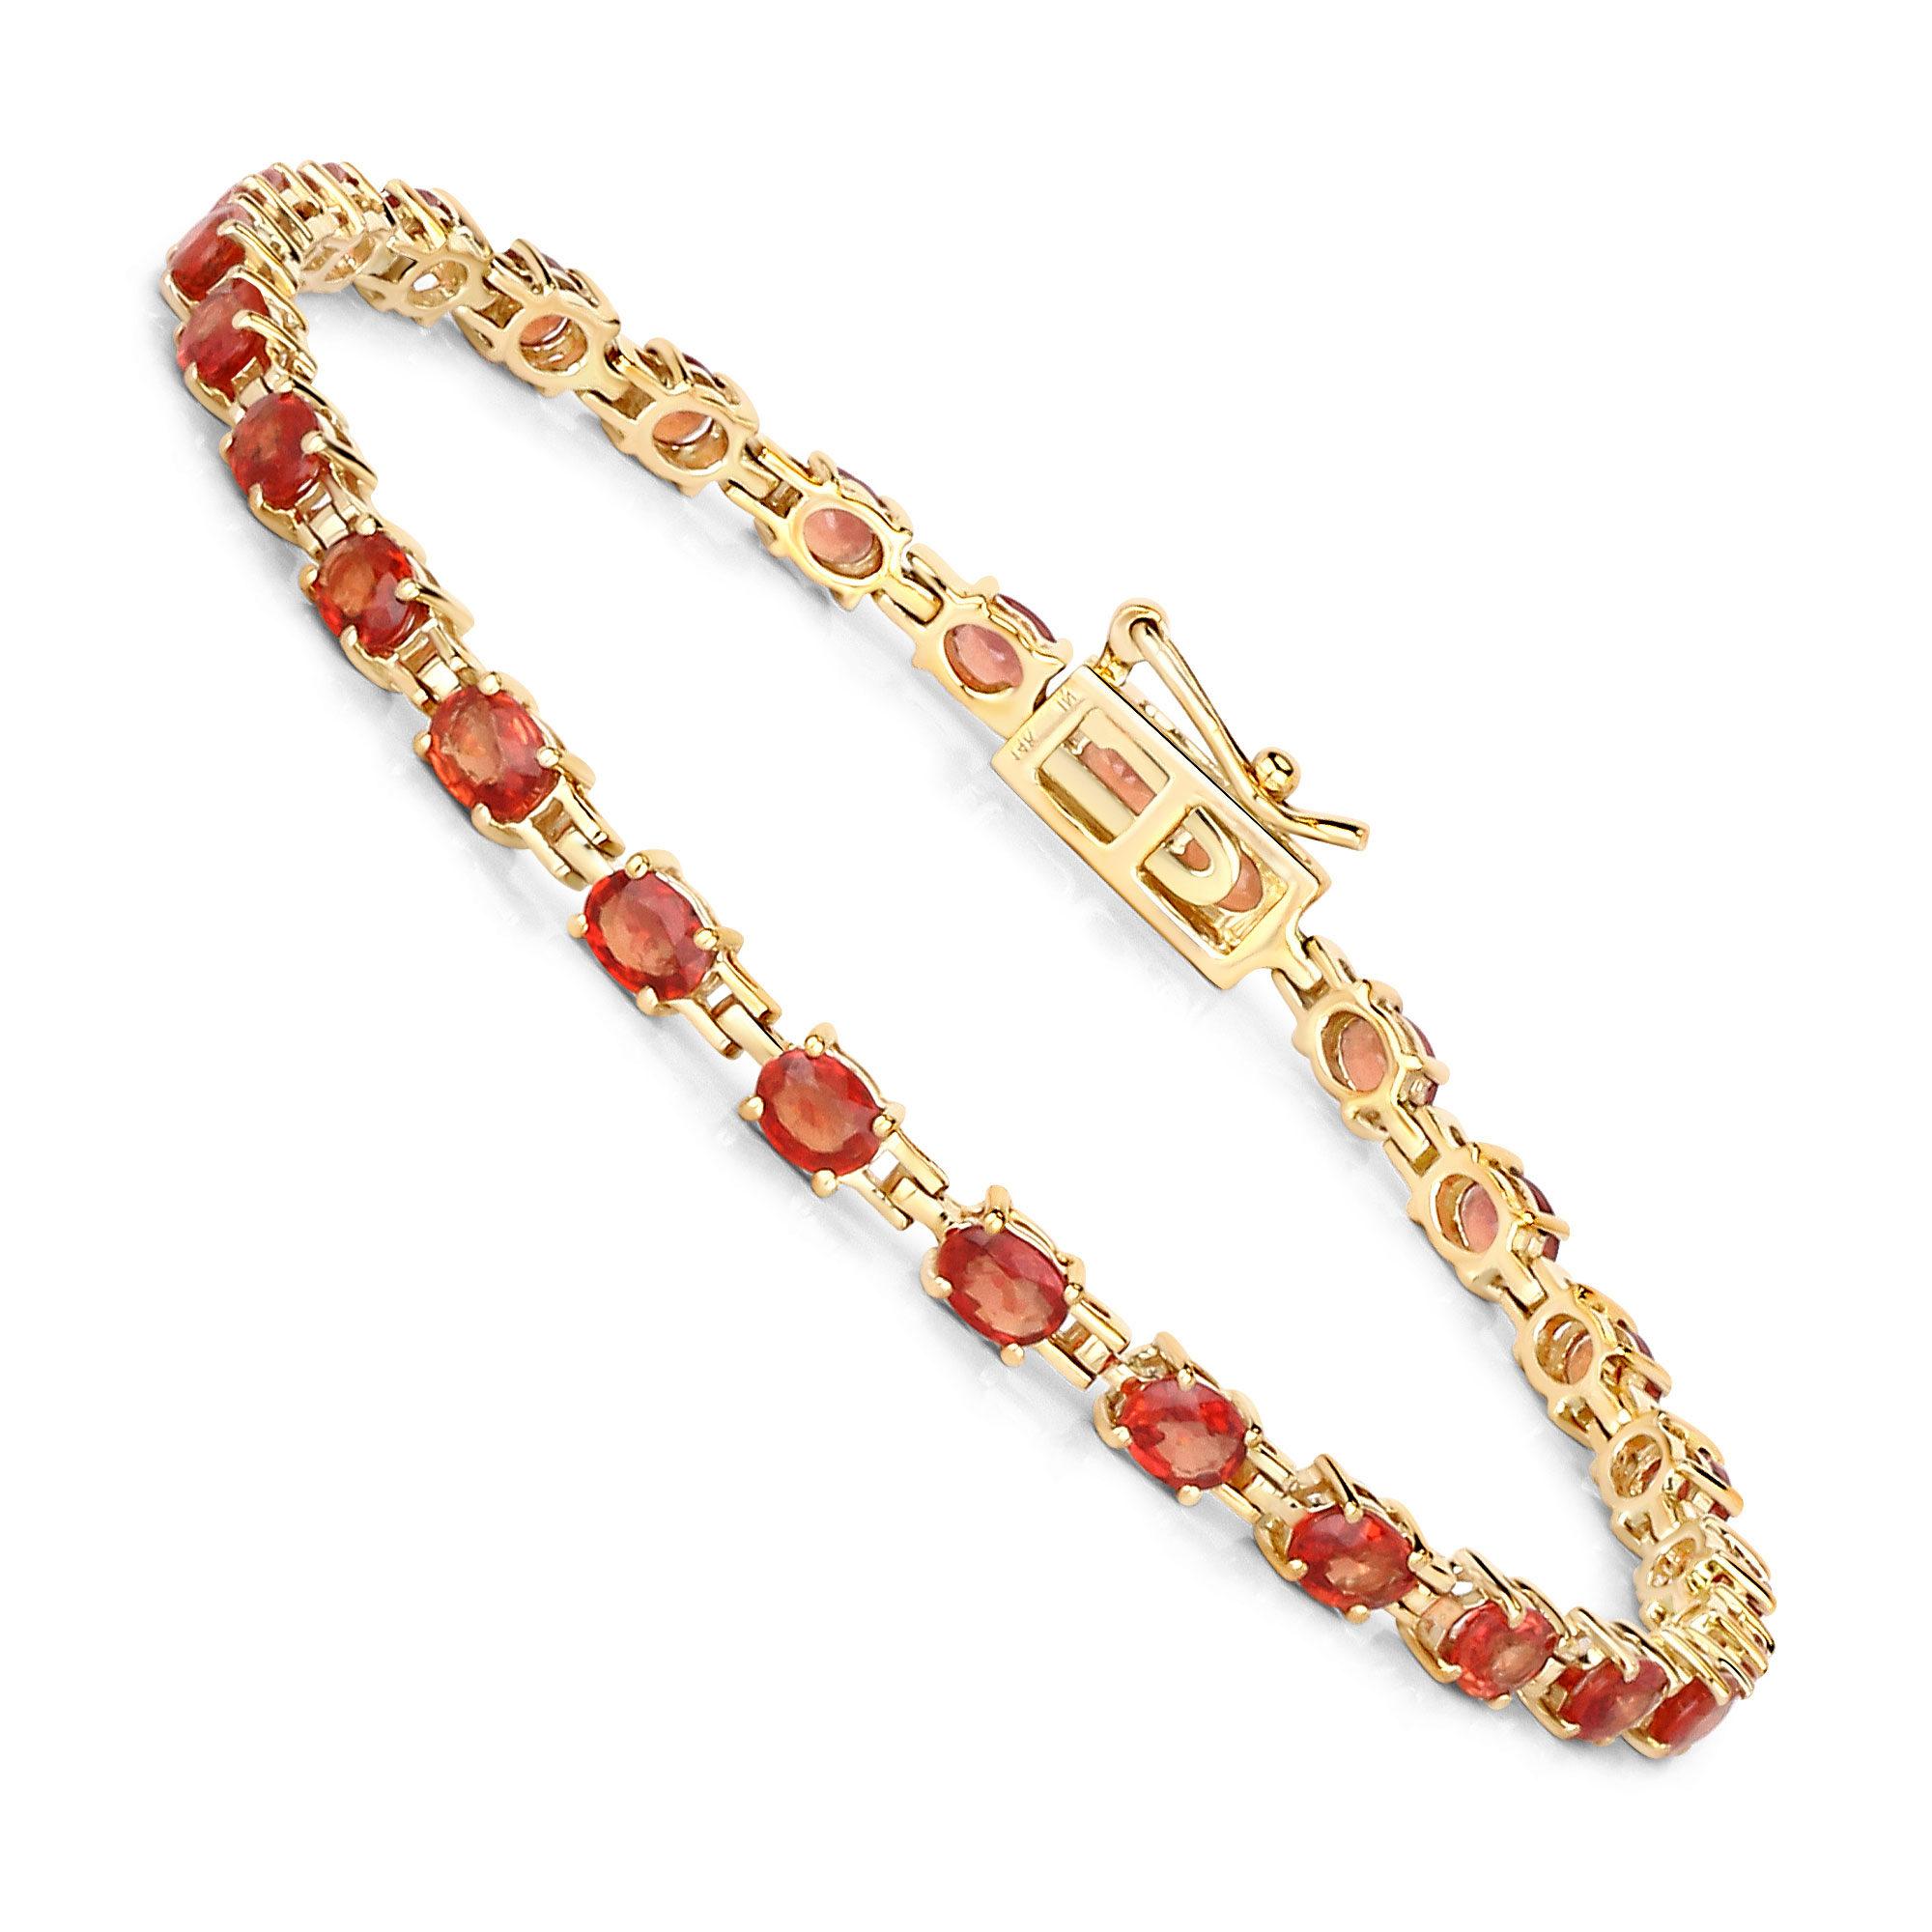 Stunning Natural Red Orange Sapphire Tennis Bracelet 7 Carats 14k Yellow Gold For Sale 1